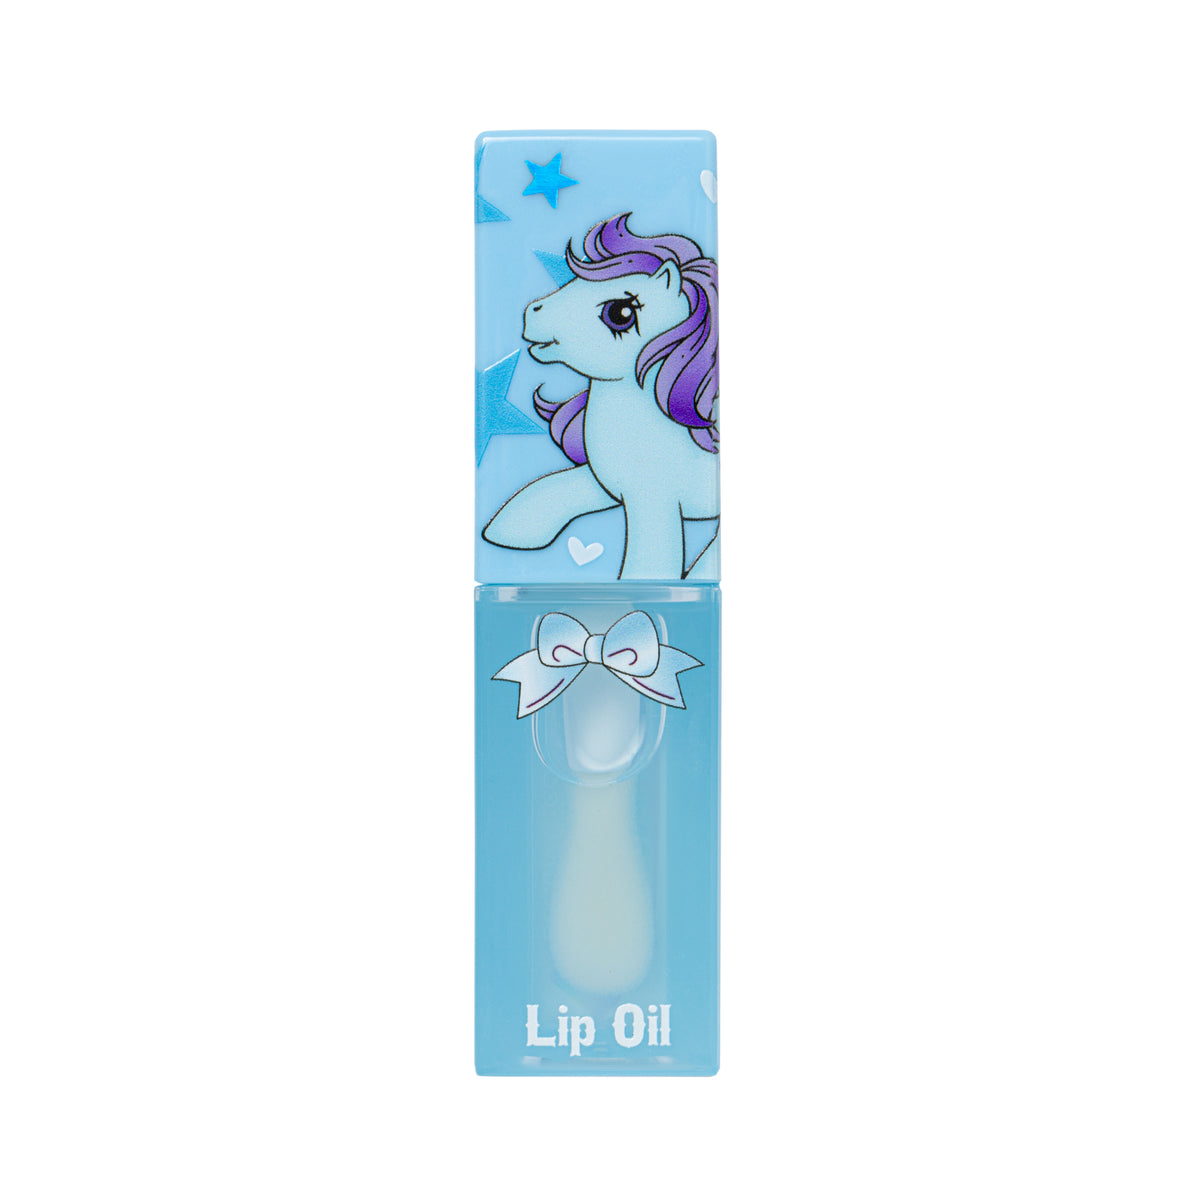 "MADE IN THE 80" LIP OIL MY LITTLE PONY - BEAUTY CREATIONS